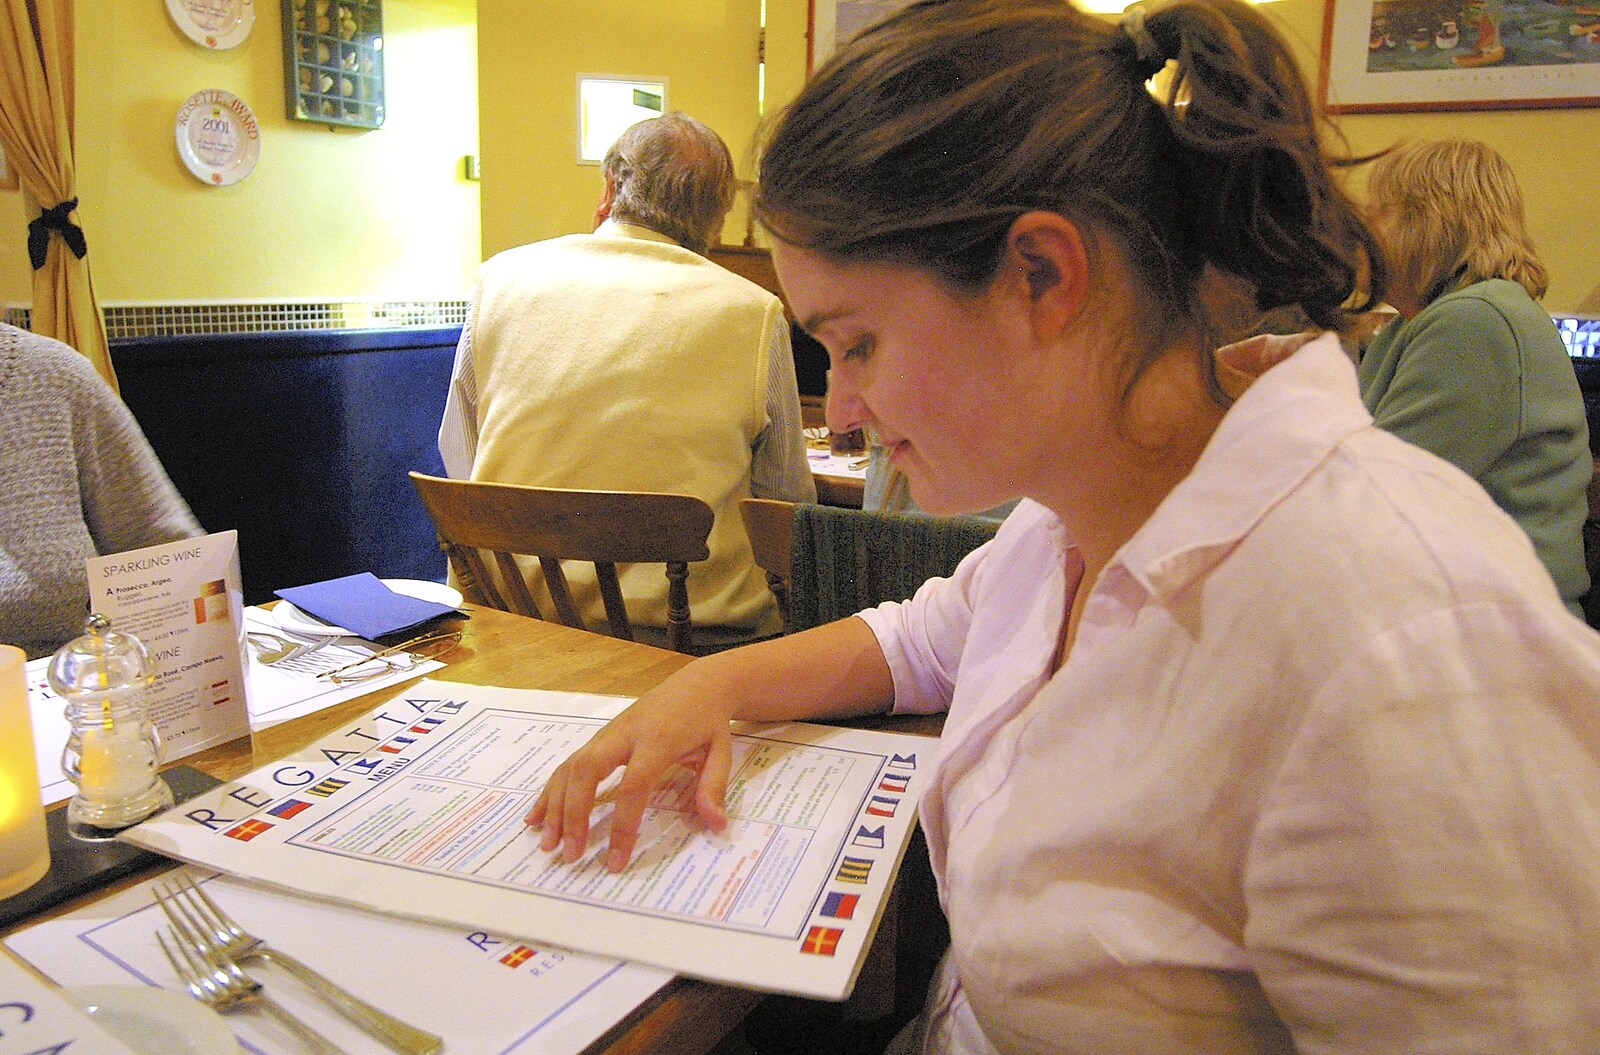 Isobel chooses food from The Regatta Restaurant with Mother and Mike, Aldeburgh, Suffolk - 10th August 2006